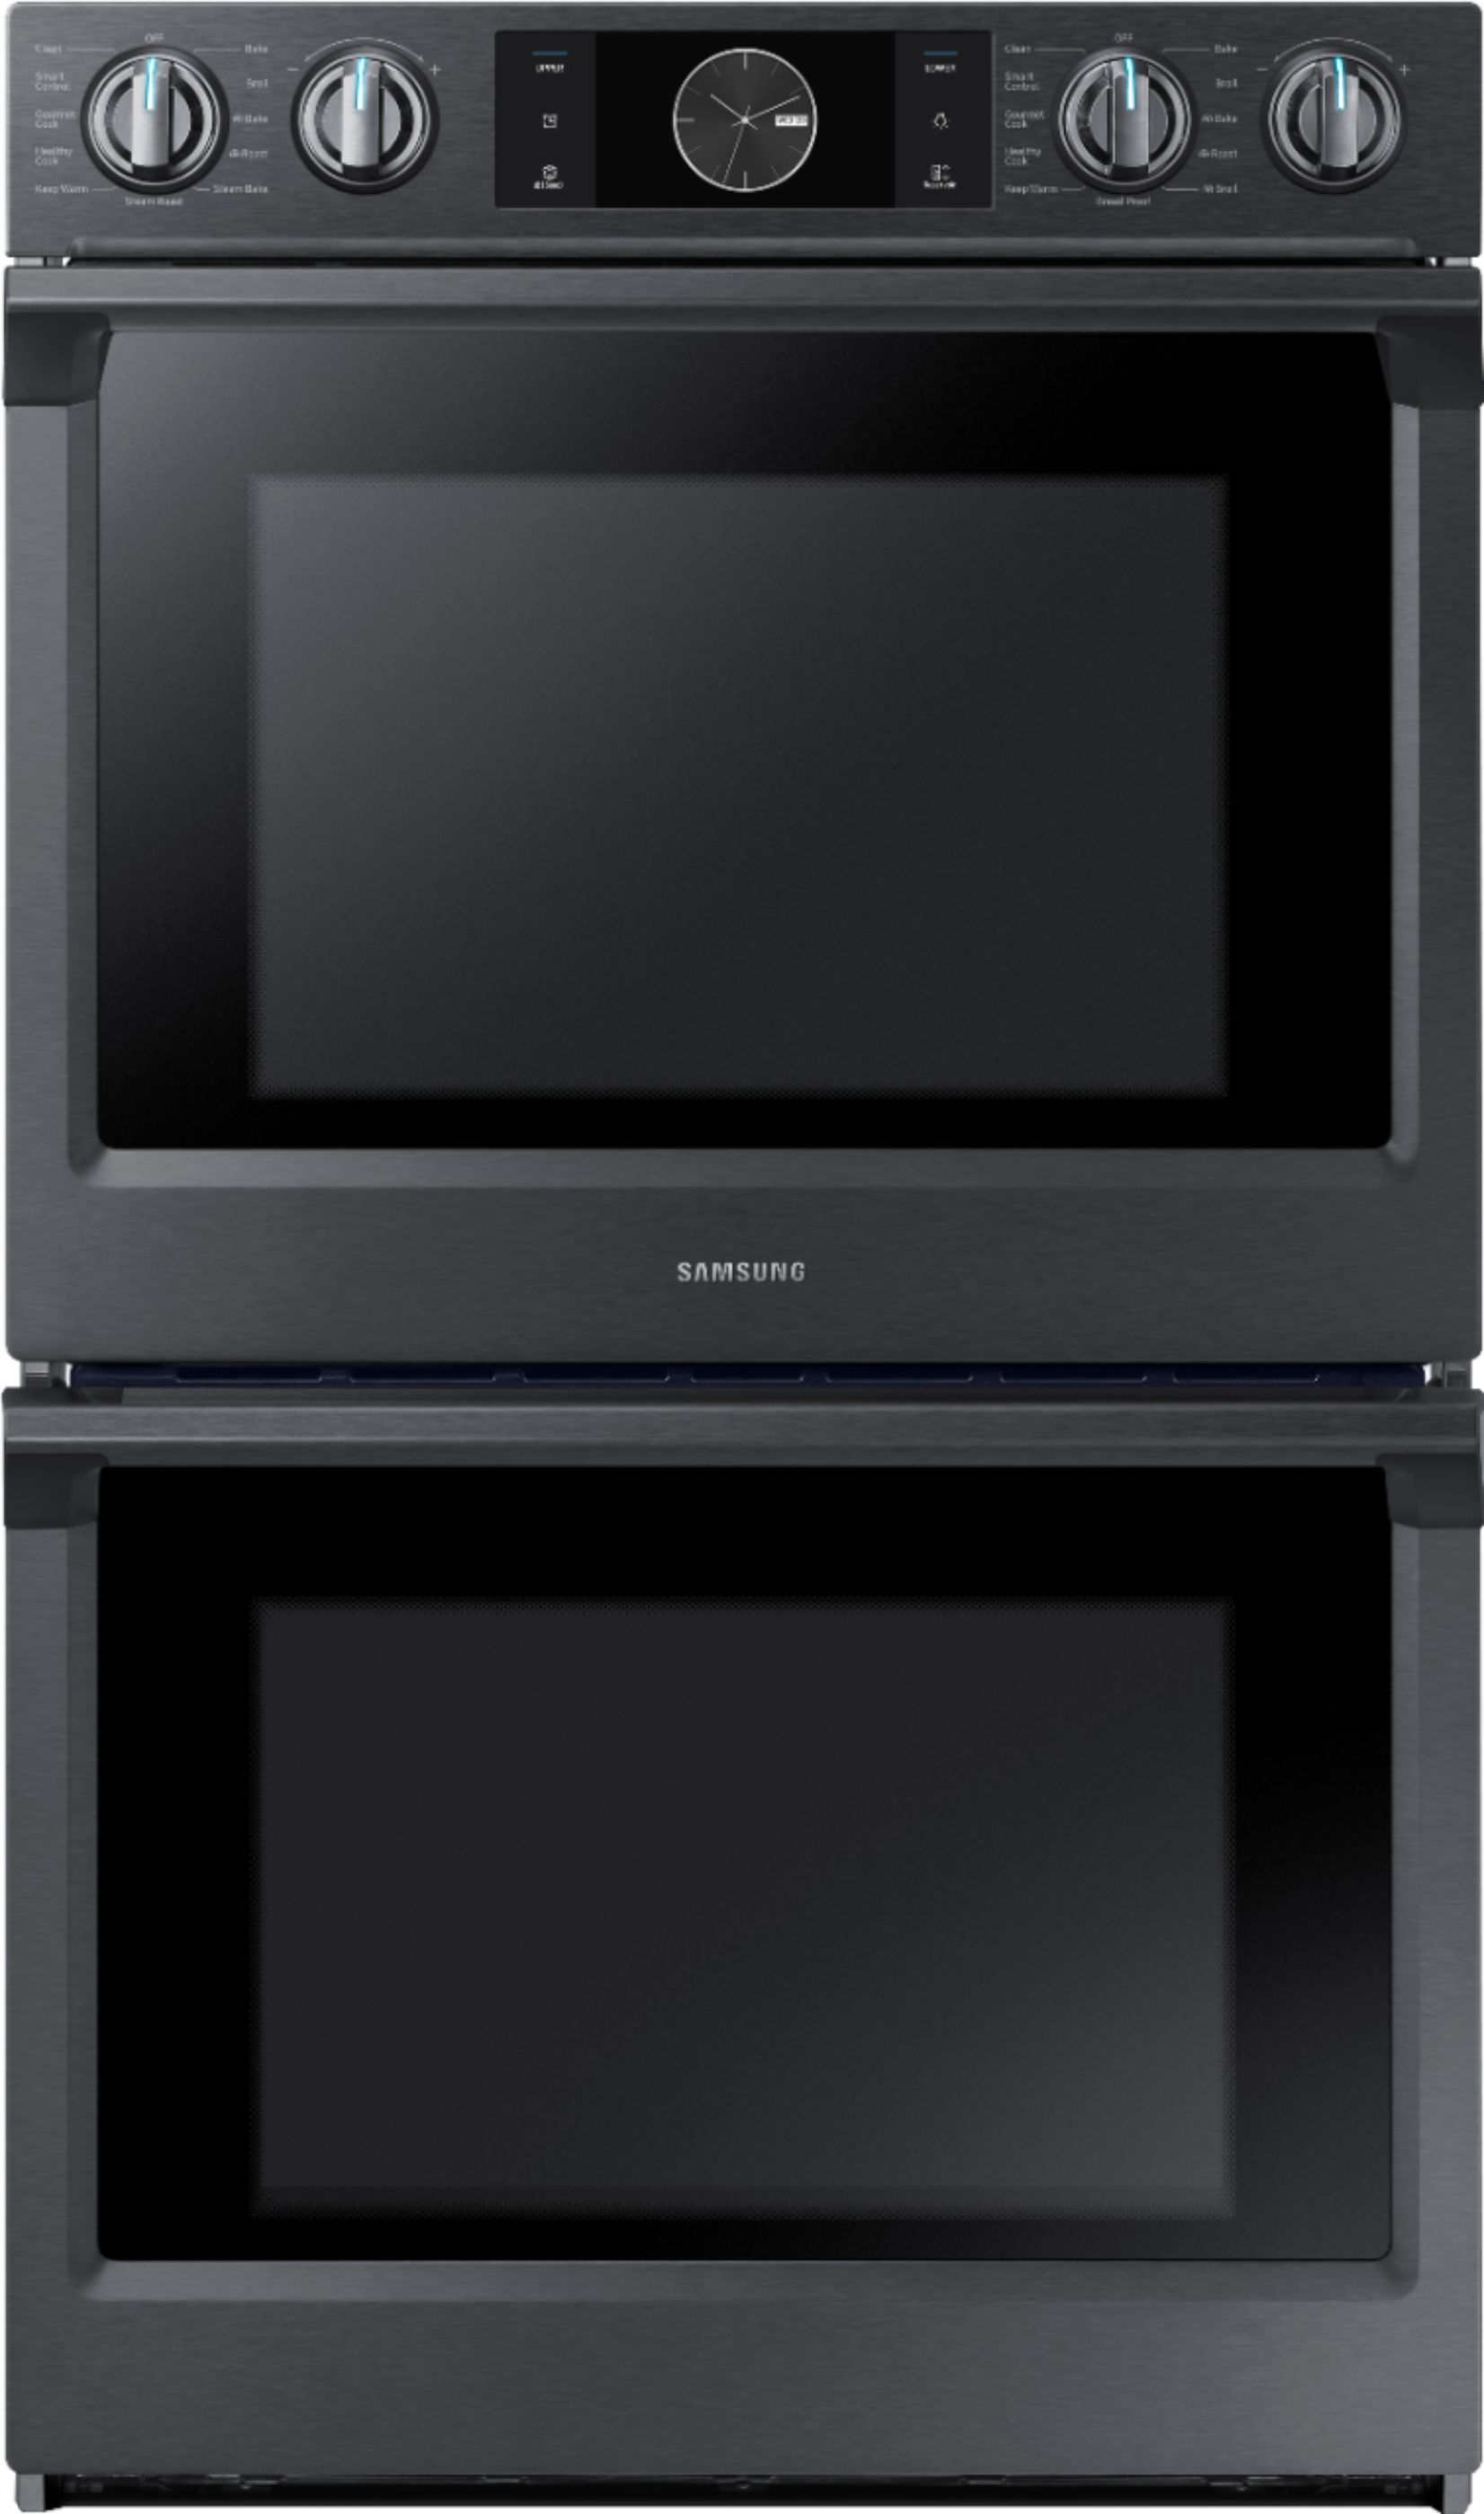 Samsung 30" Double Wall Oven with Flex Duo, Steam Cook and WiFi